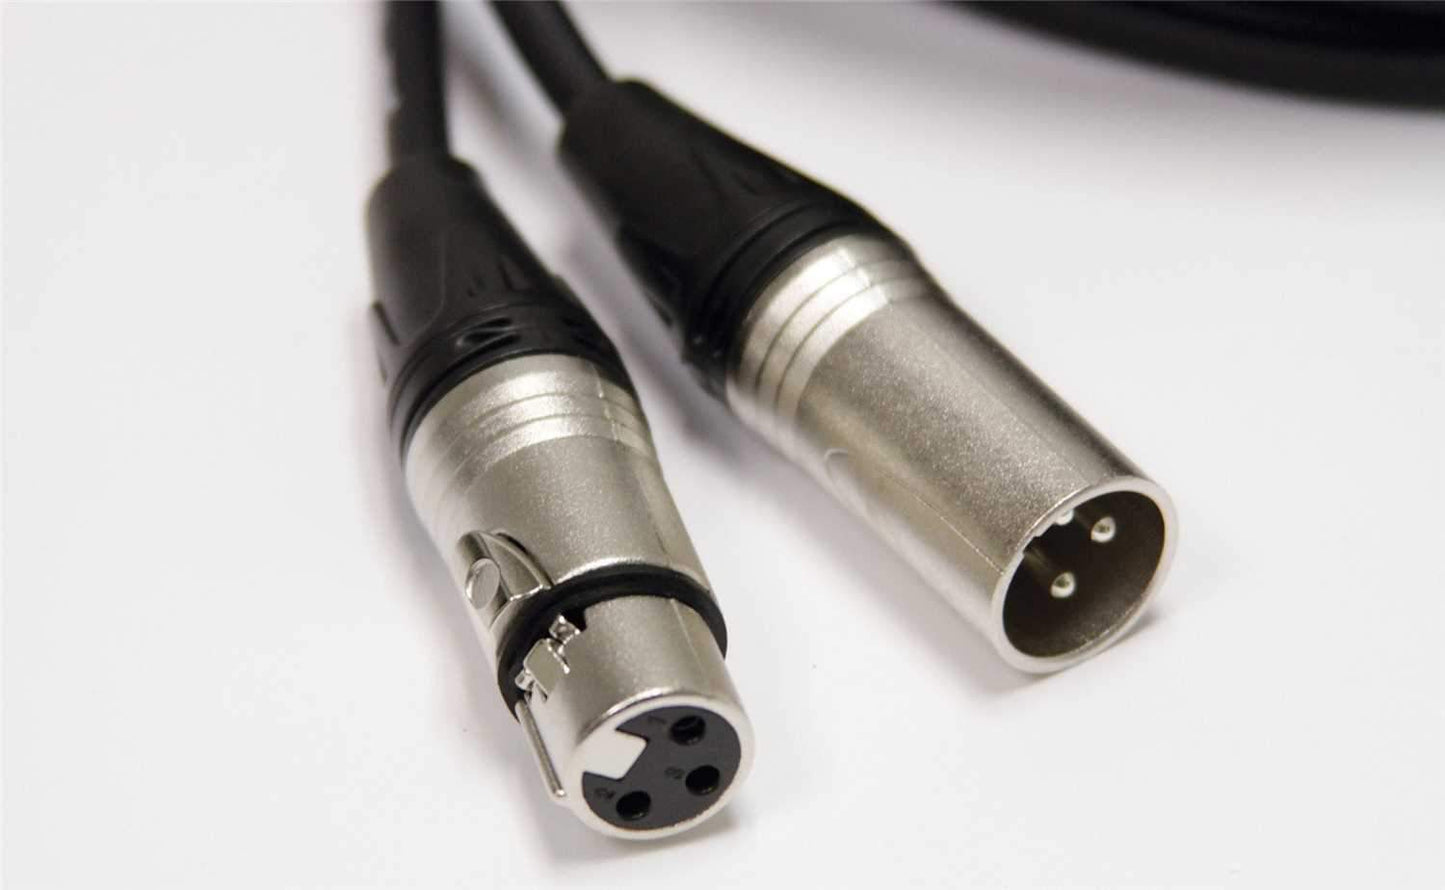 100-Foot XLR to XLR Balanced Microphone Cable - PSSL ProSound and Stage Lighting